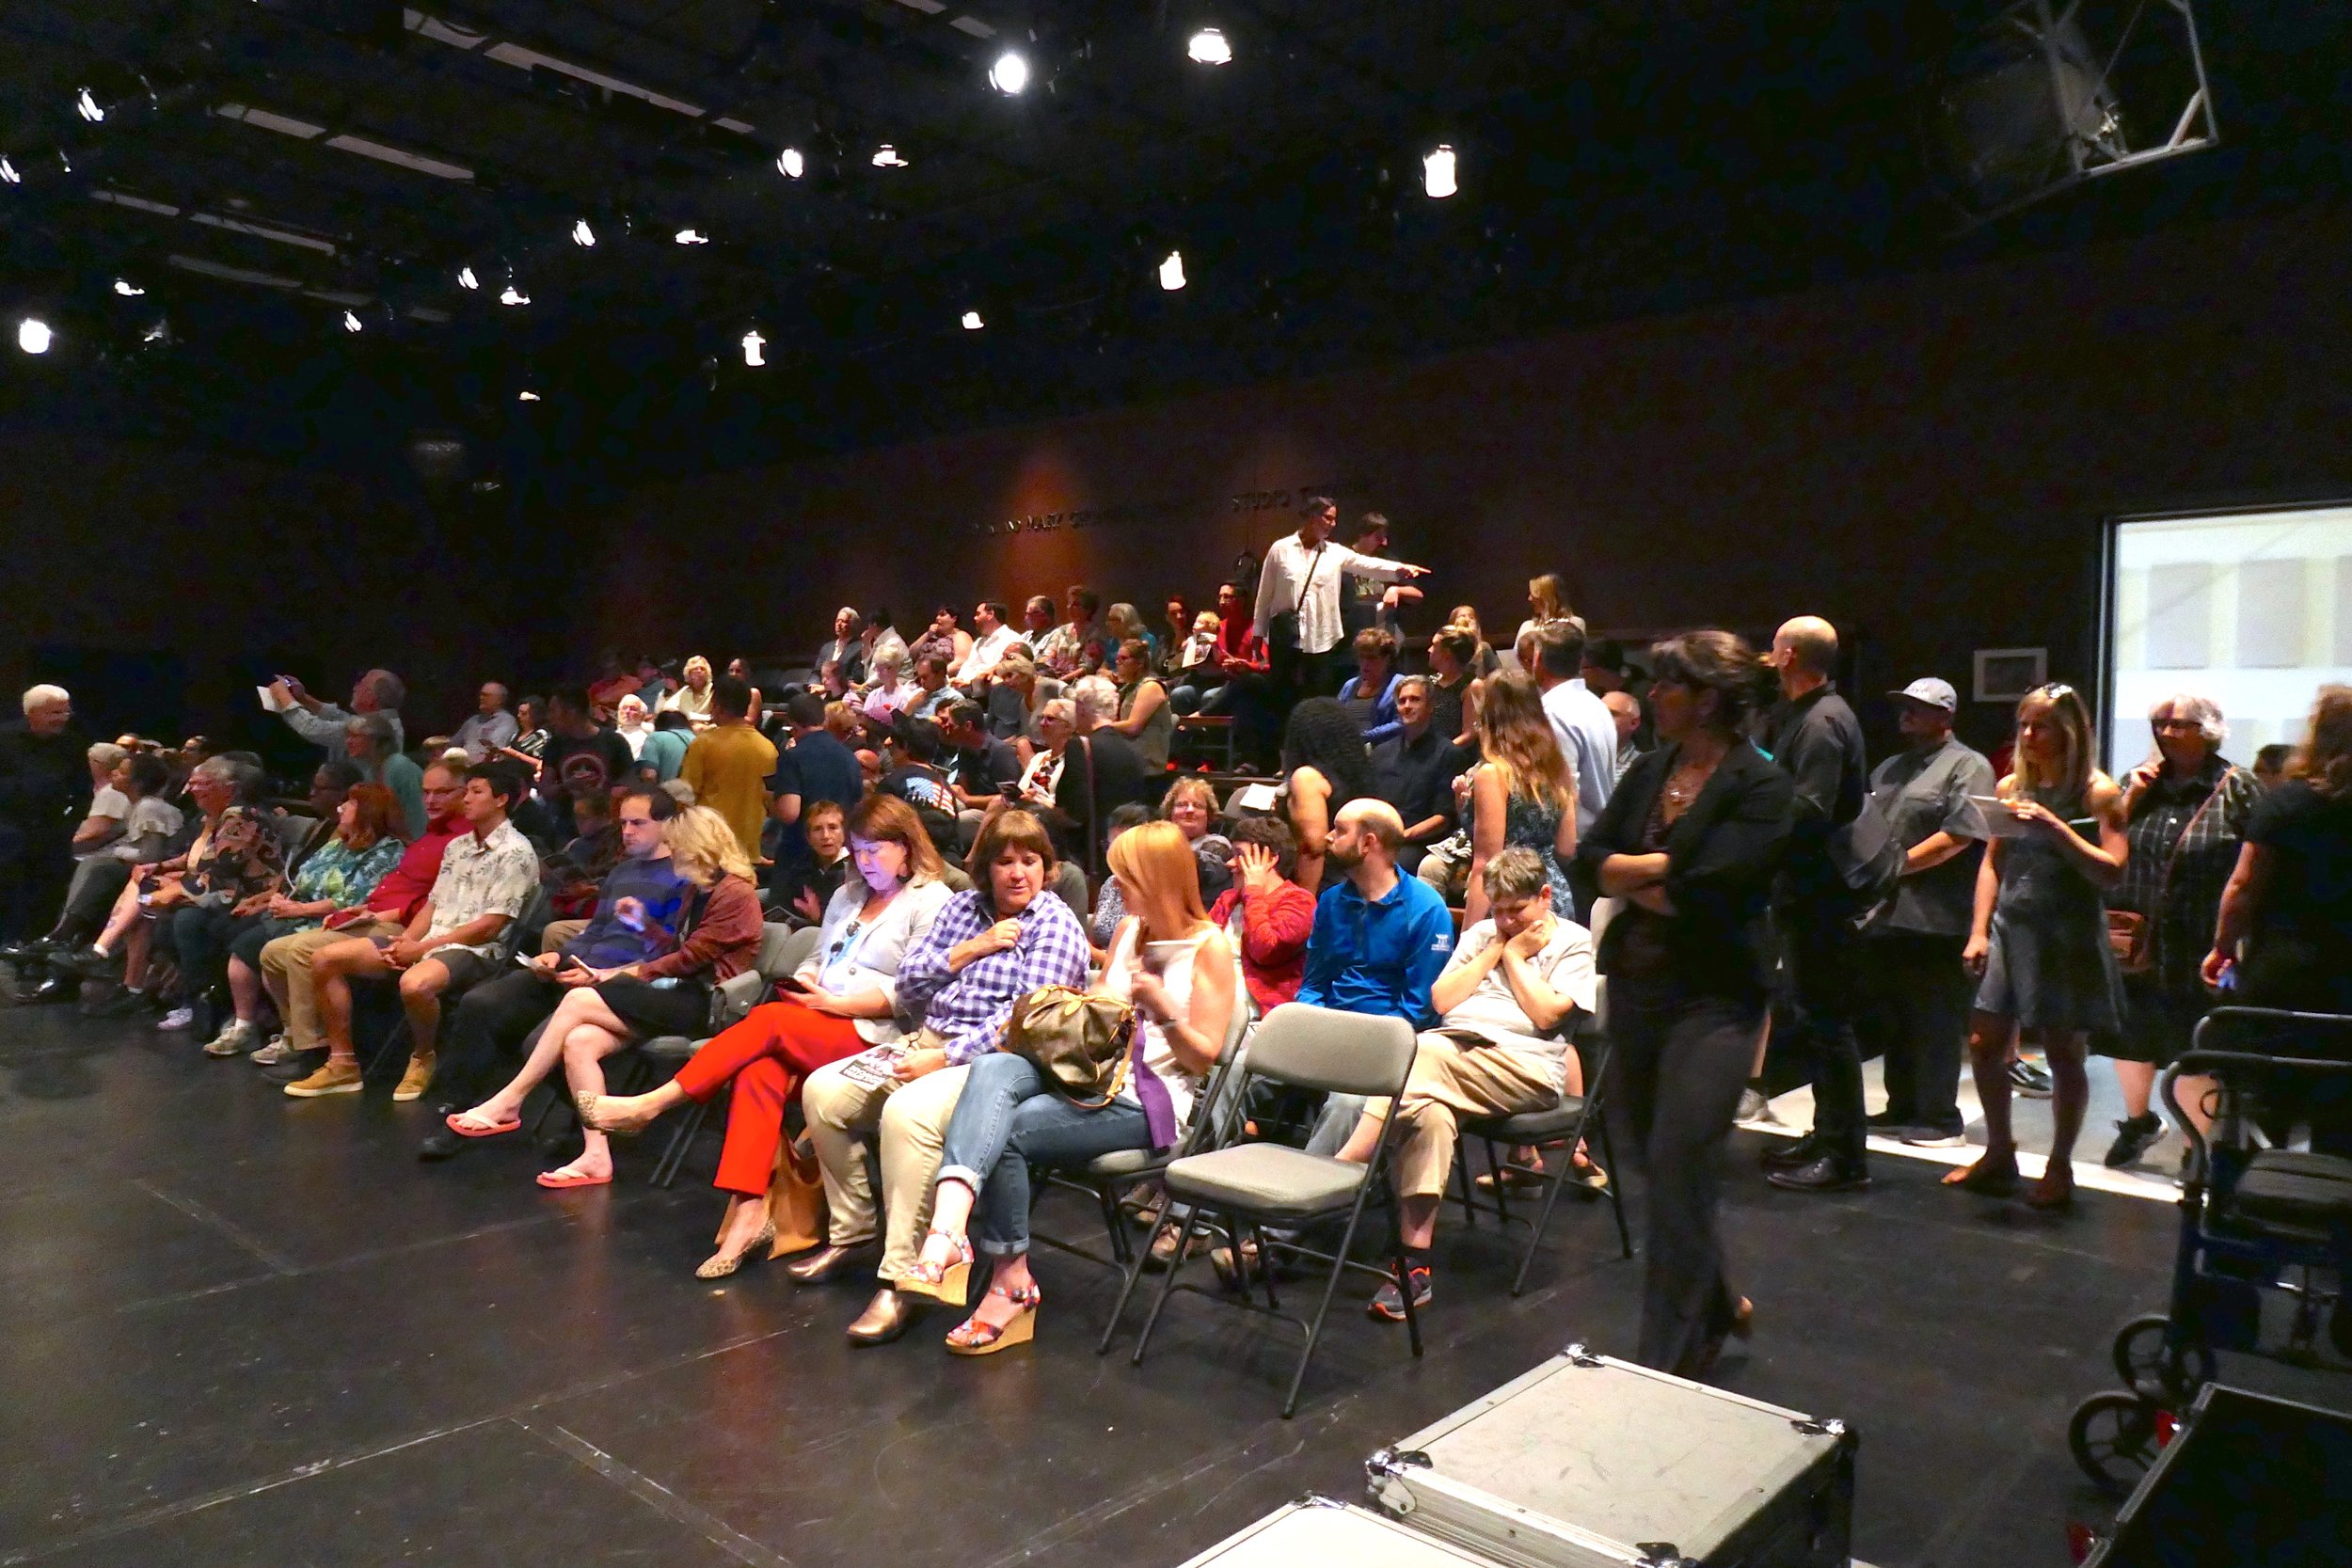 Full audience of seated people in a black box theatre